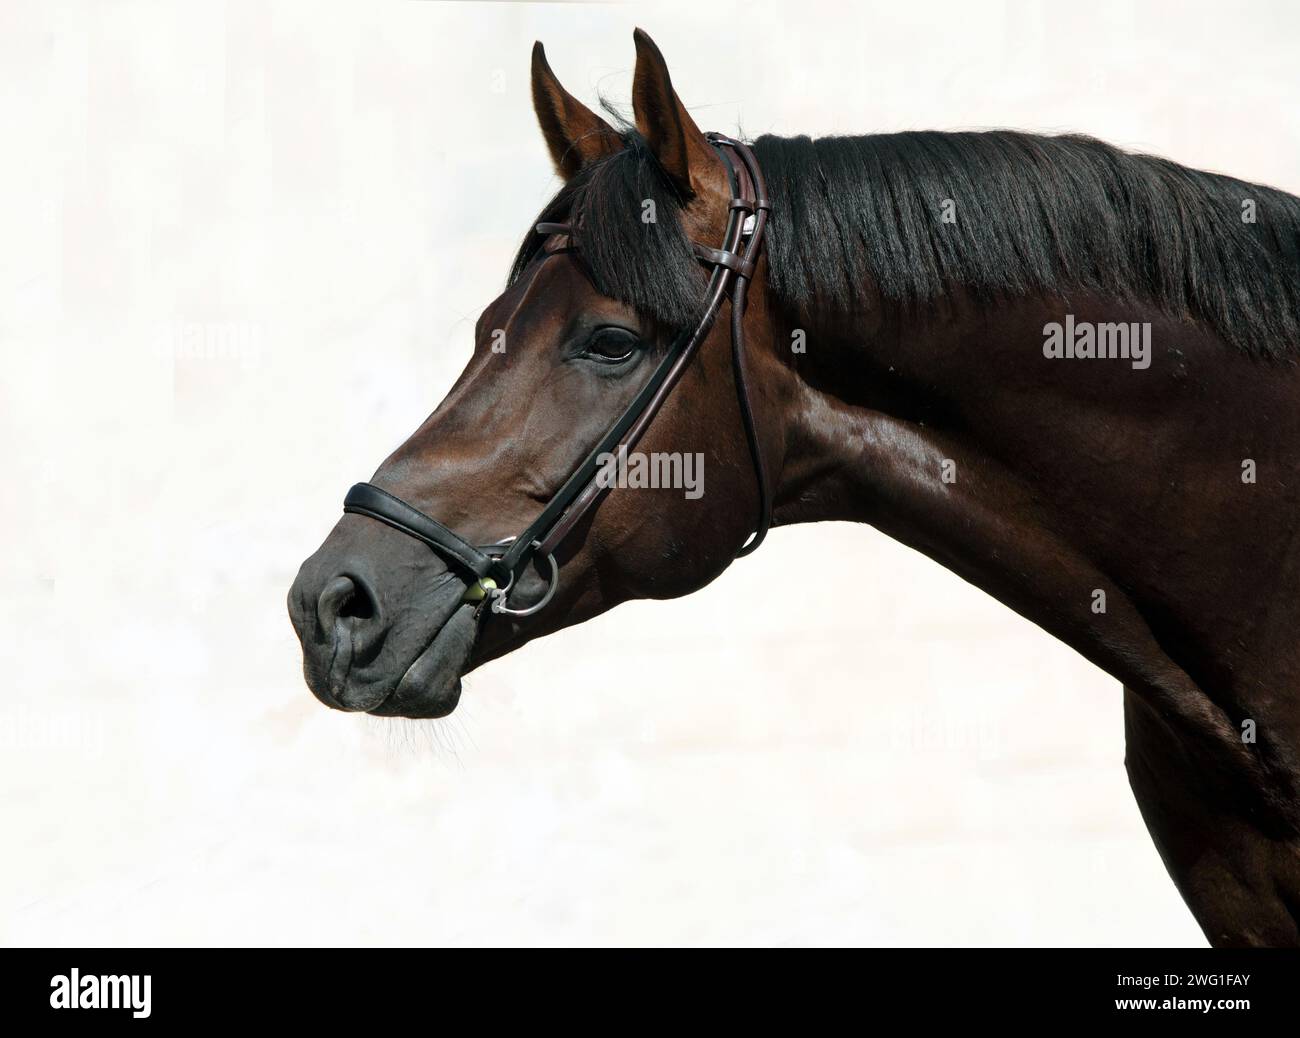 The thoroughbred racing black horse in light background Stock Photo